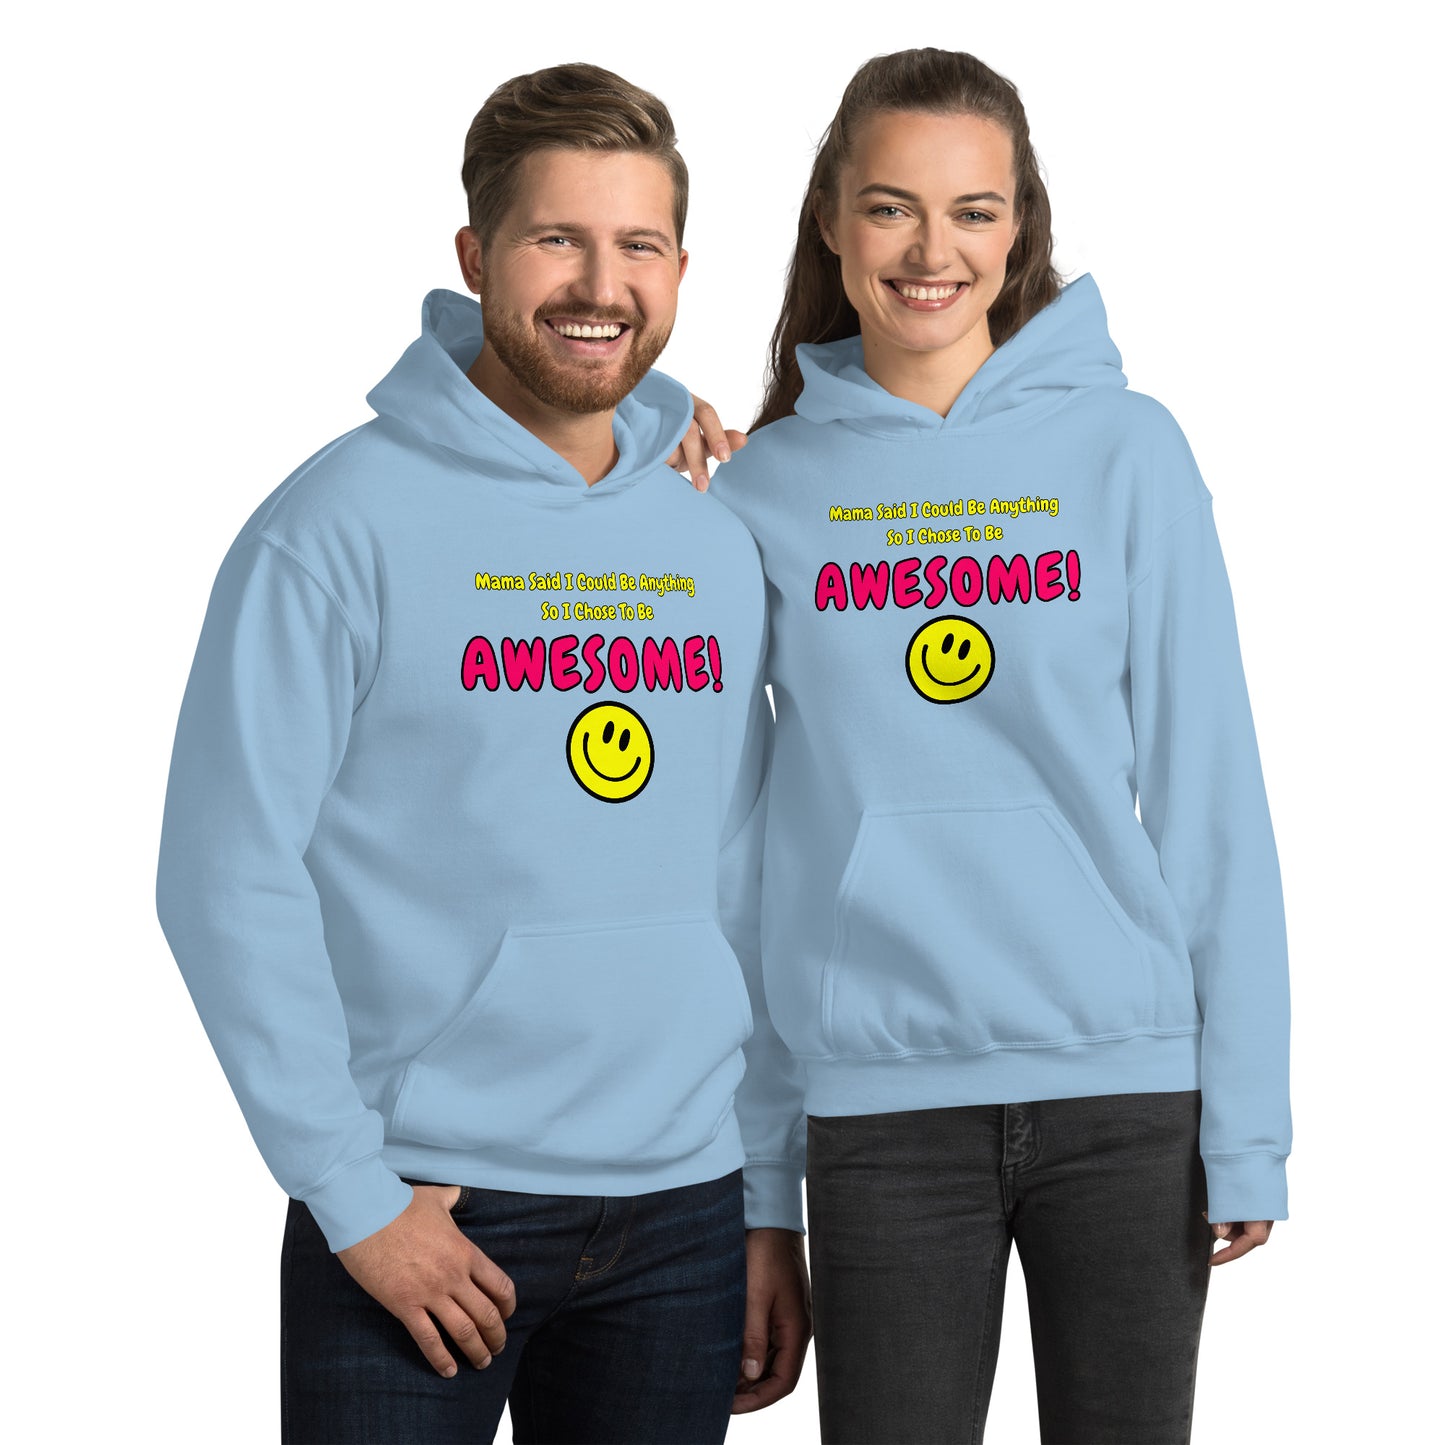 Mama Said I Could Be Anything So I Chose To Be AWESOME! Unisex Hoodie